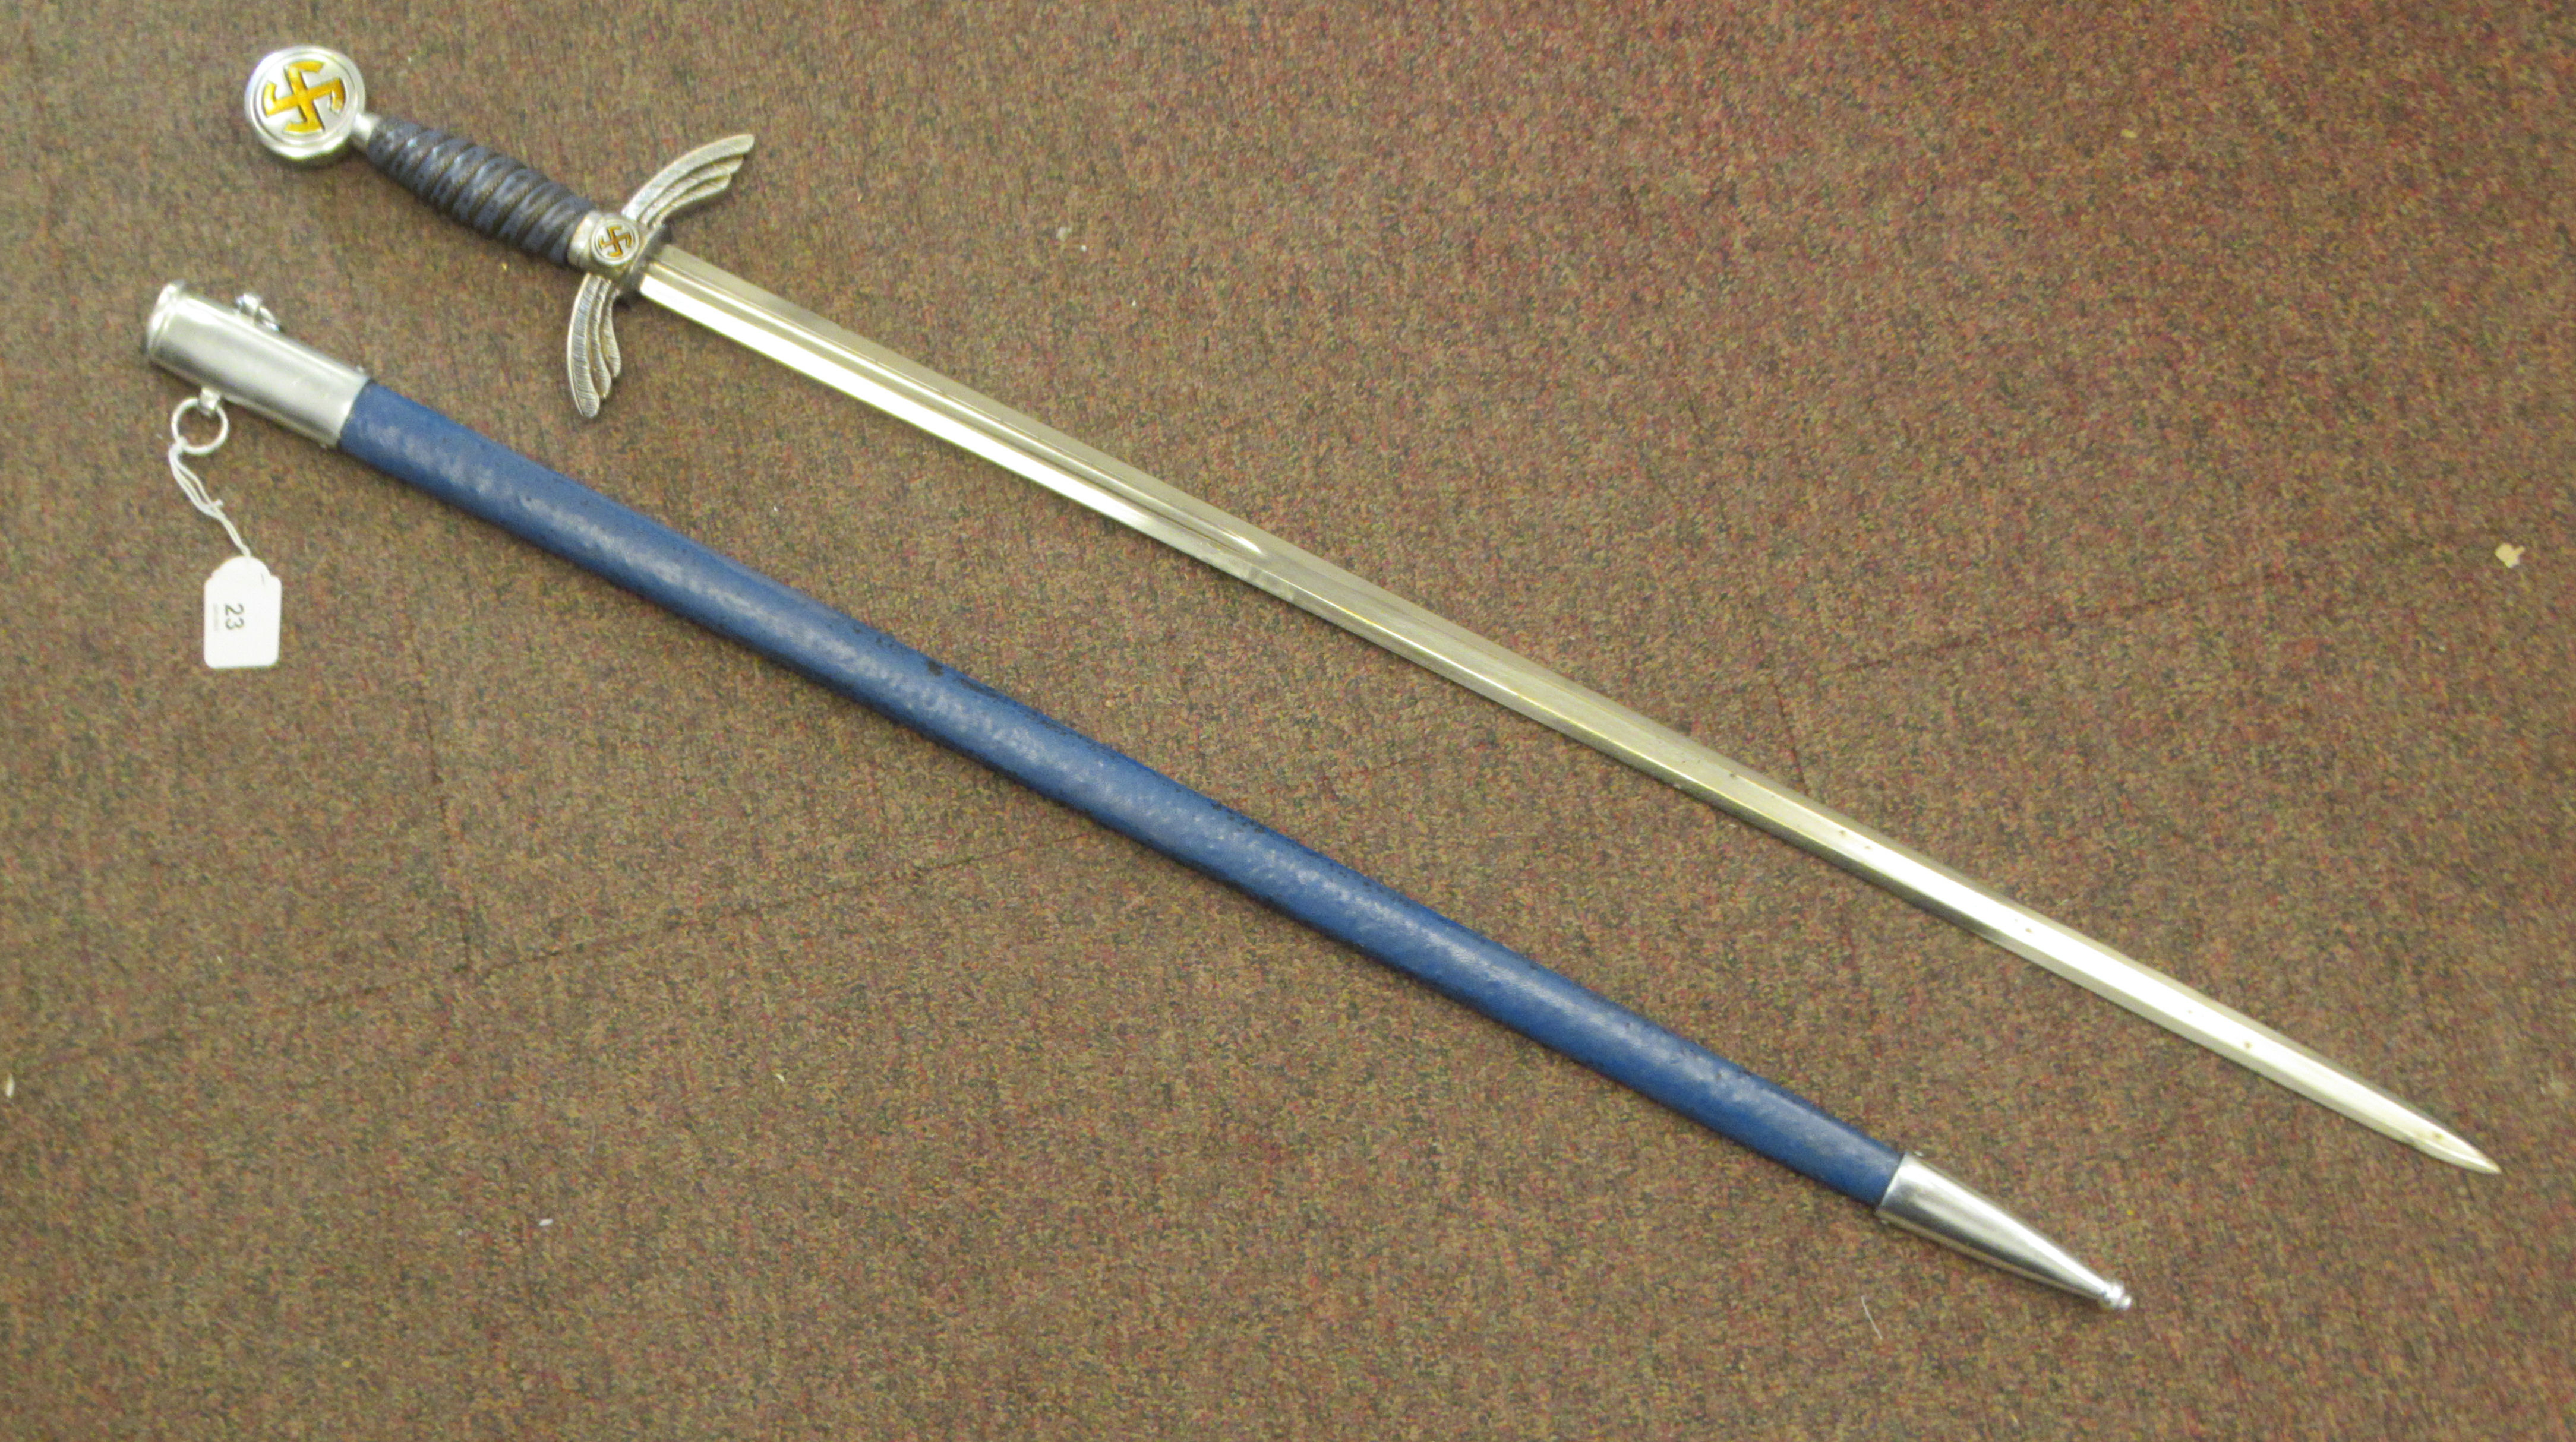 A German Luftwaffe dress sword with swastika emblems on the pommel and hilt, a woven wire bound